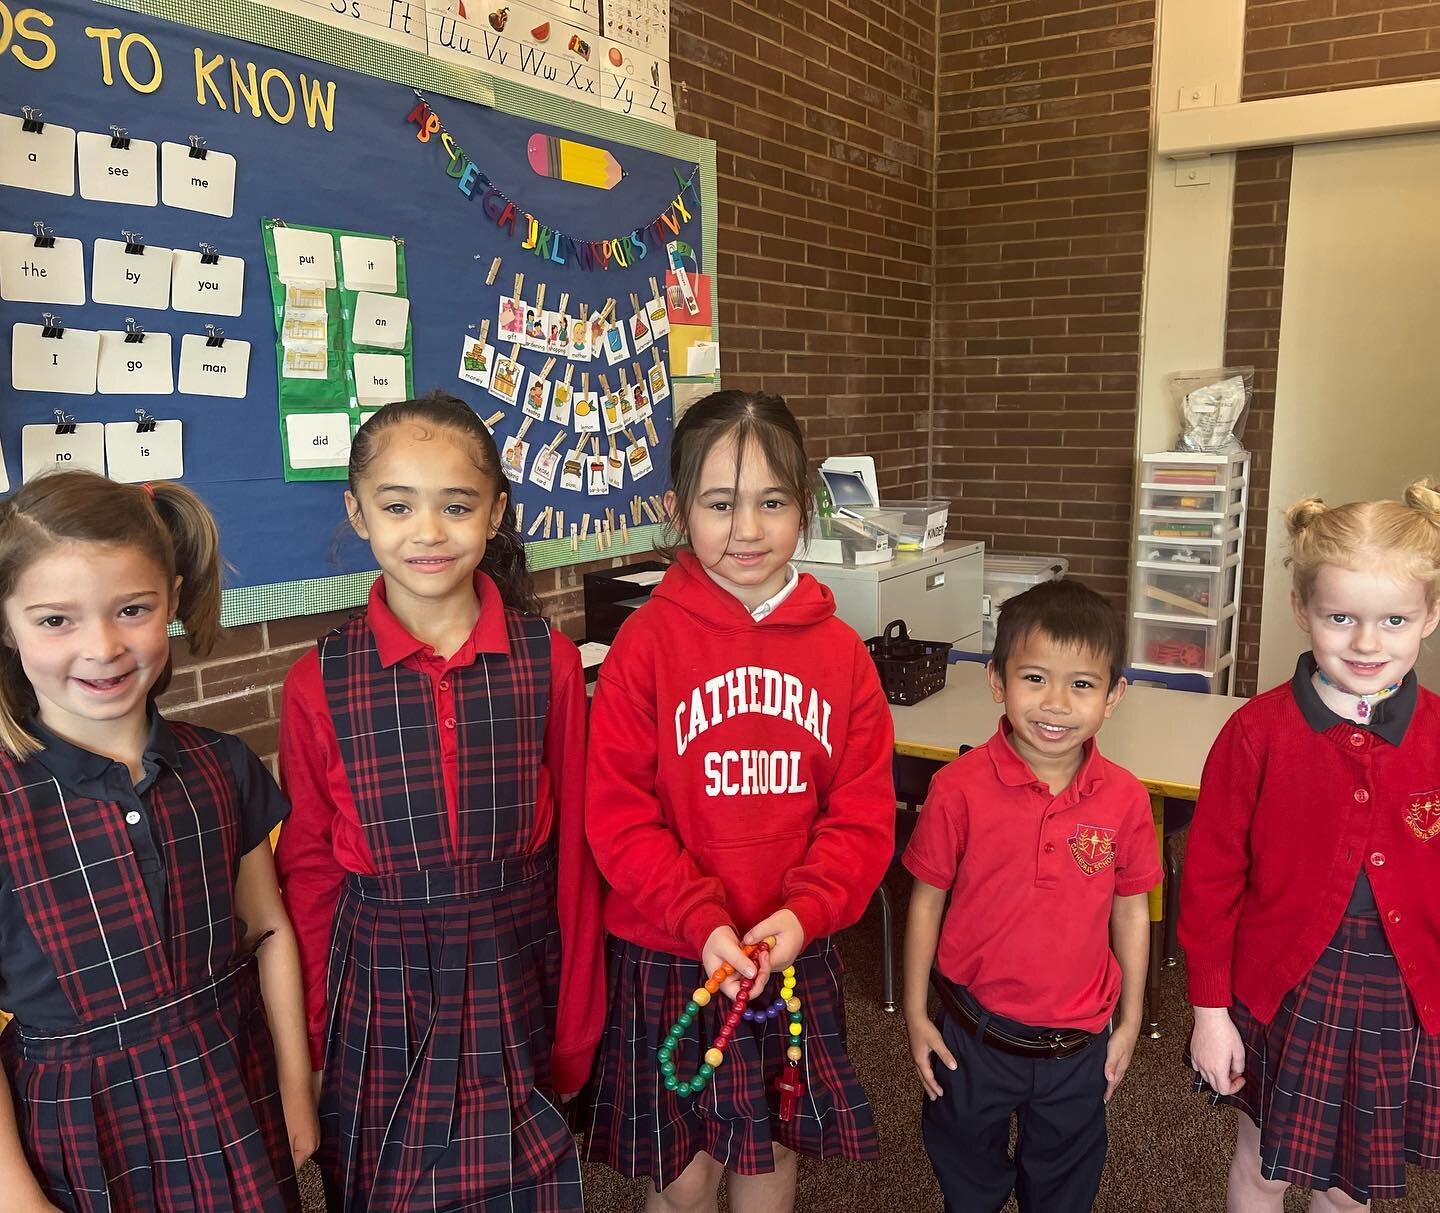 Classroom Happenings:
May is dedicated to honoring Mary, the Mother of God.

Kindergarten students have been learning about Mary and saying the rosary each week in her honor ❤️

#cathedralschool #catholicschool #monthofmary